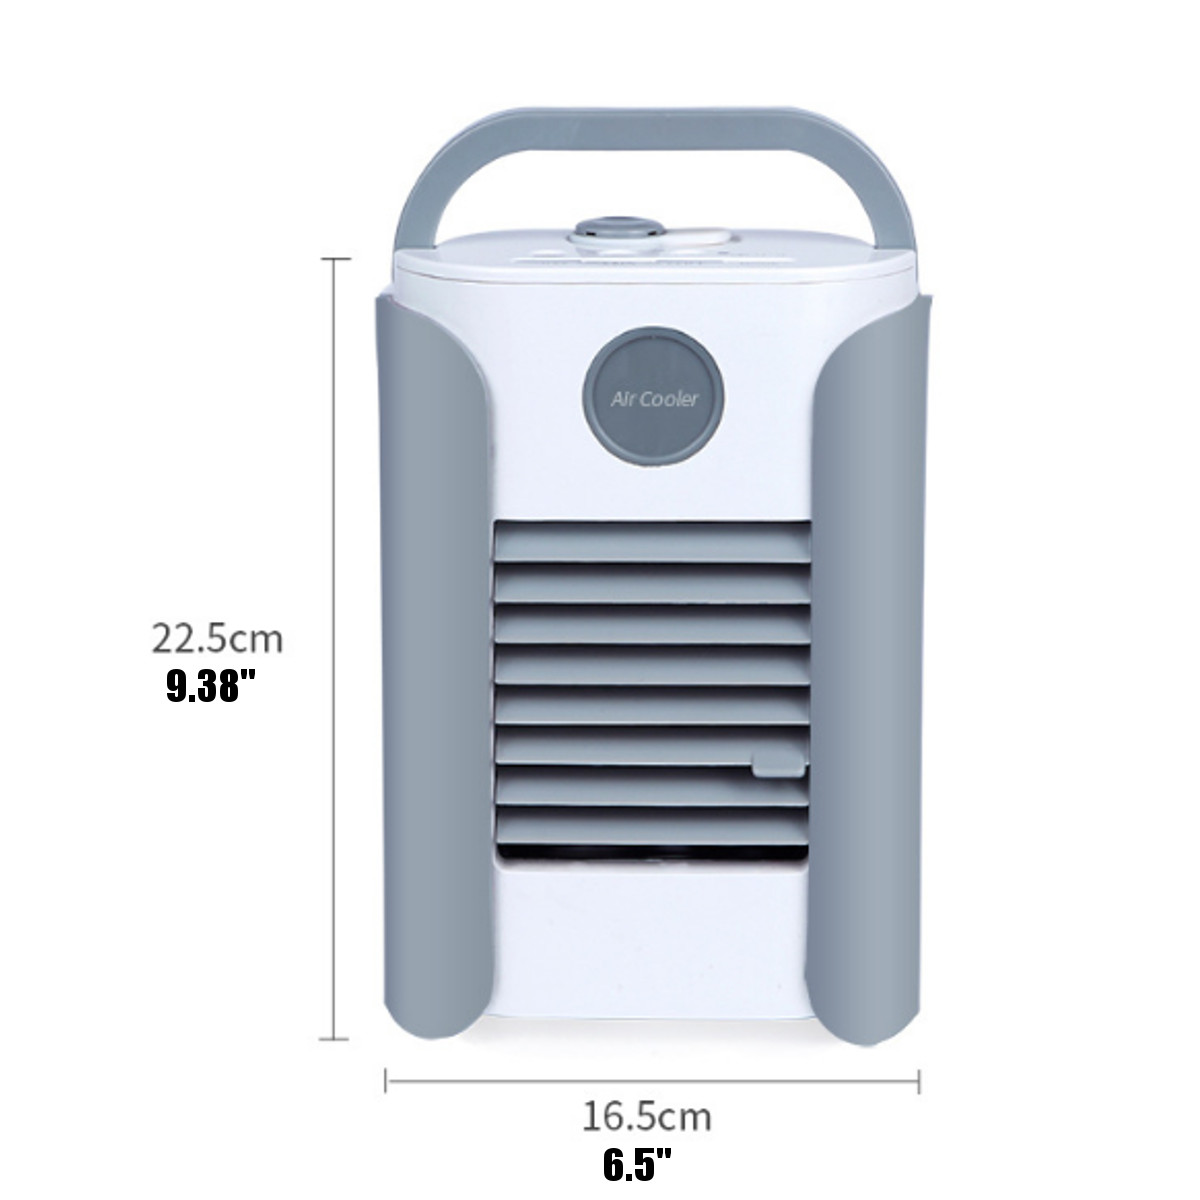 USB-Mini-Portable-Bluetooth-Radio-Air-Cooler-Humidifier-Conditioning-Mute-Spray-Cooling-Fan-1690137-10